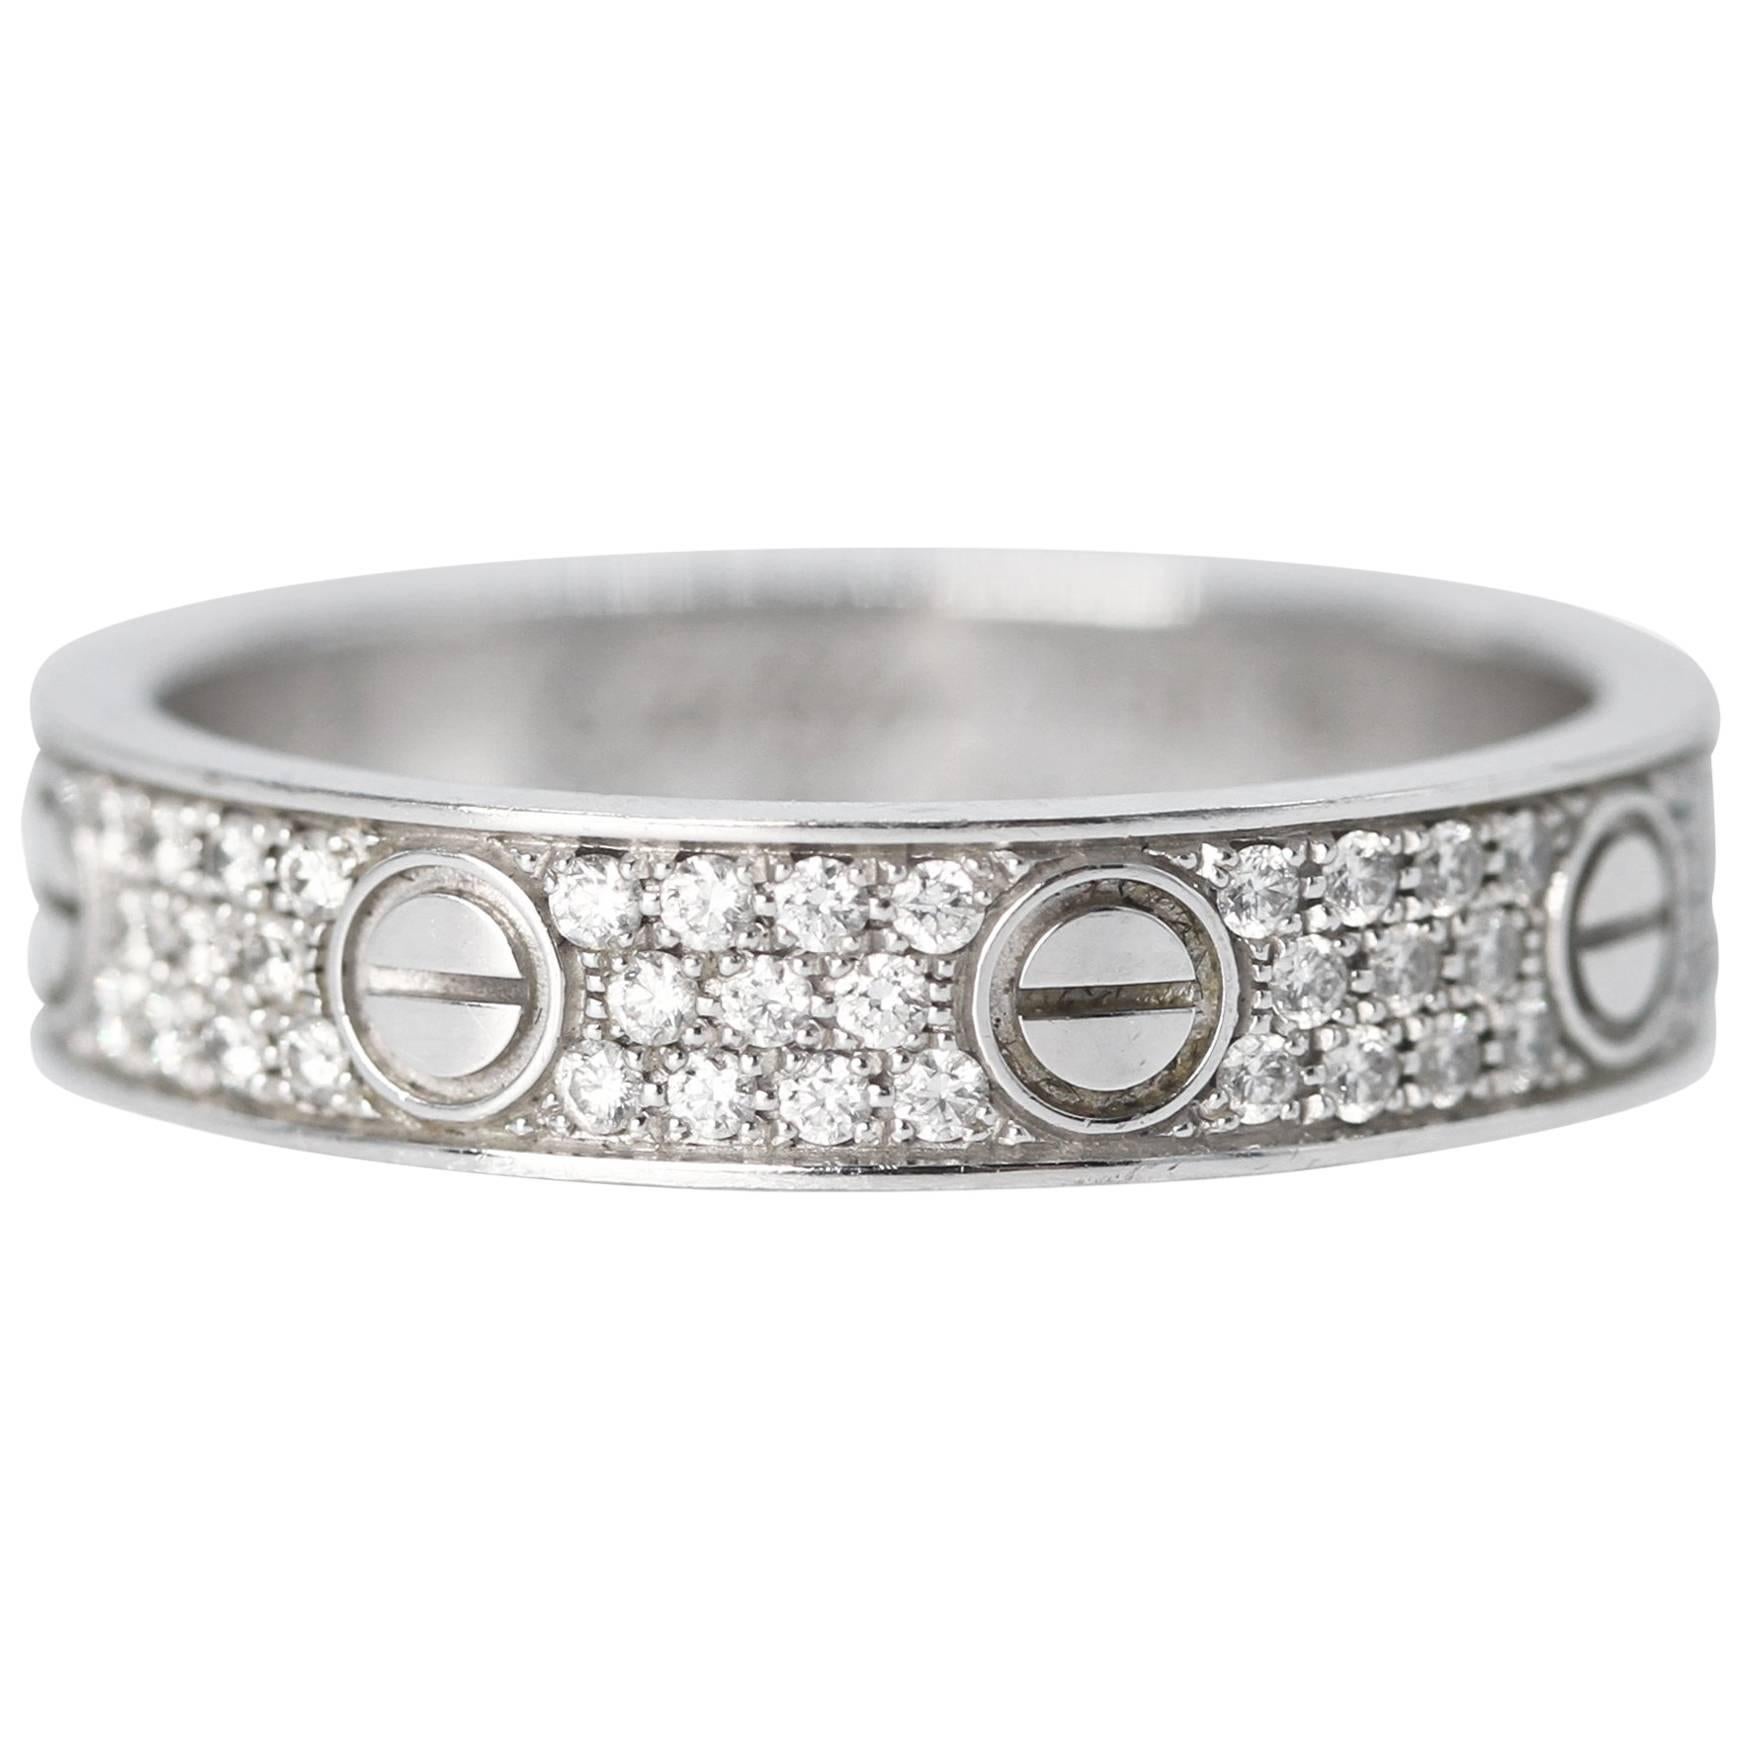 Cartier Diamond and White Gold "Love" Band Ring For Sale